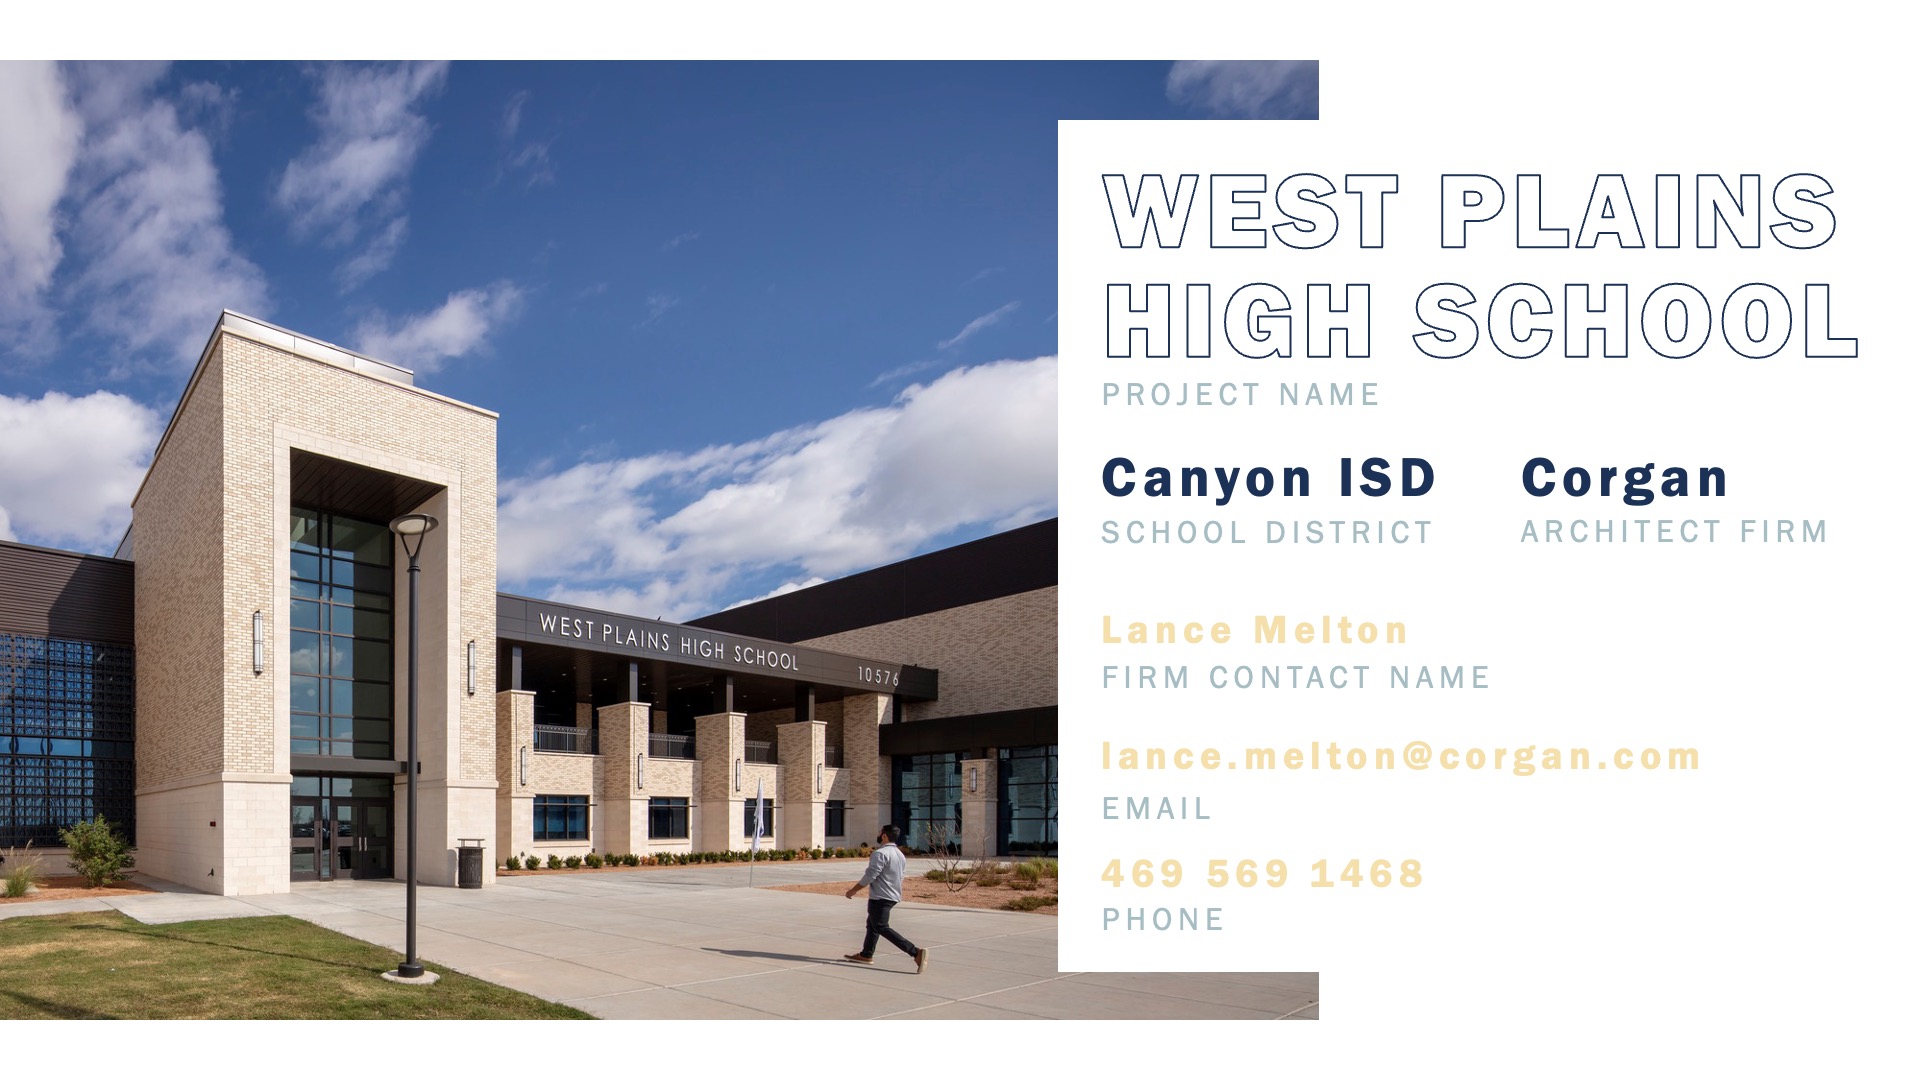 Canyon ISD—West Plains High School